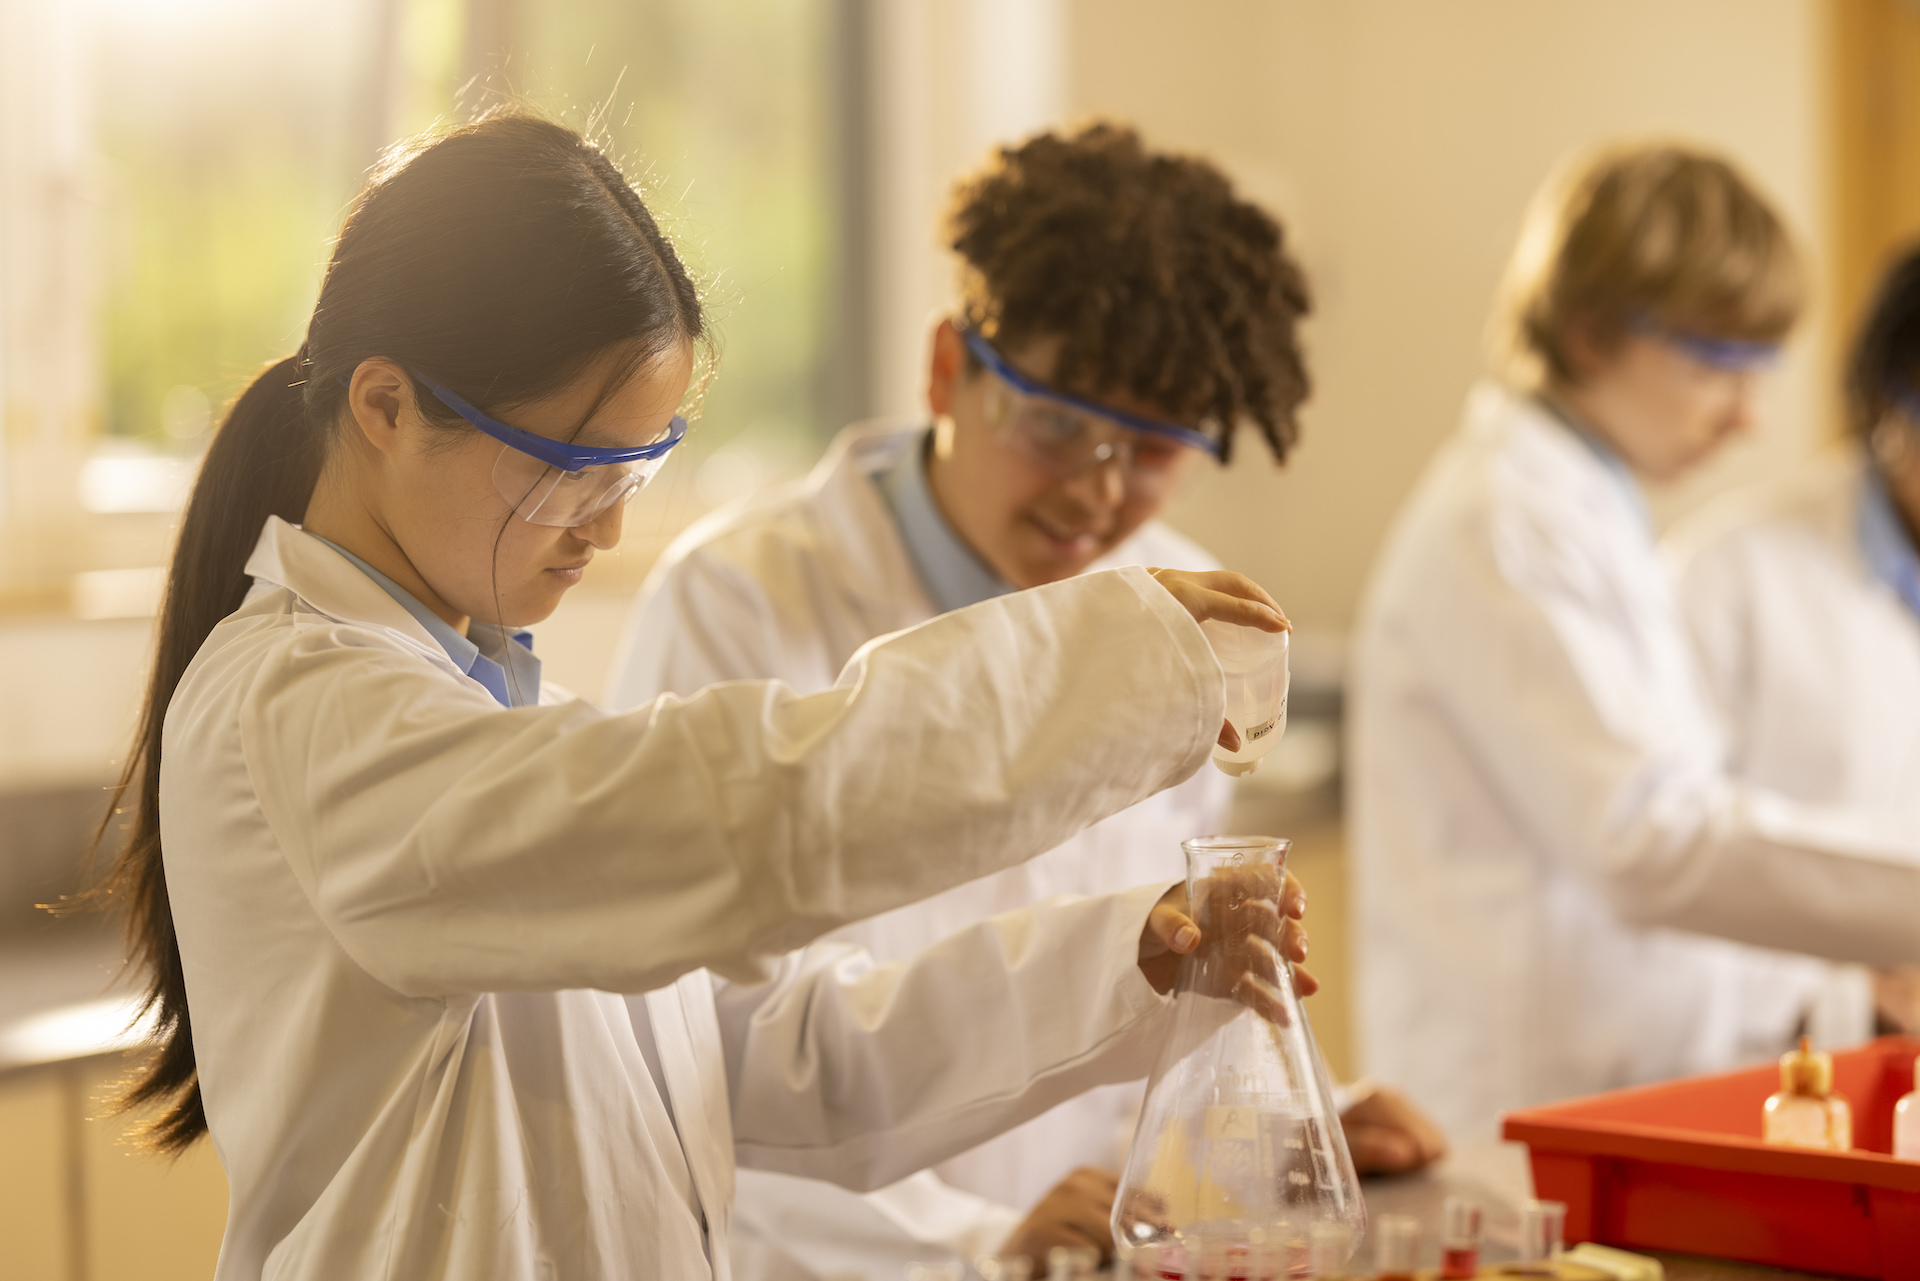 Senior pupils in science class at Ibstock Place School, a private school near Richmond, Barnes, Putney, Kingston, and Wandsworth